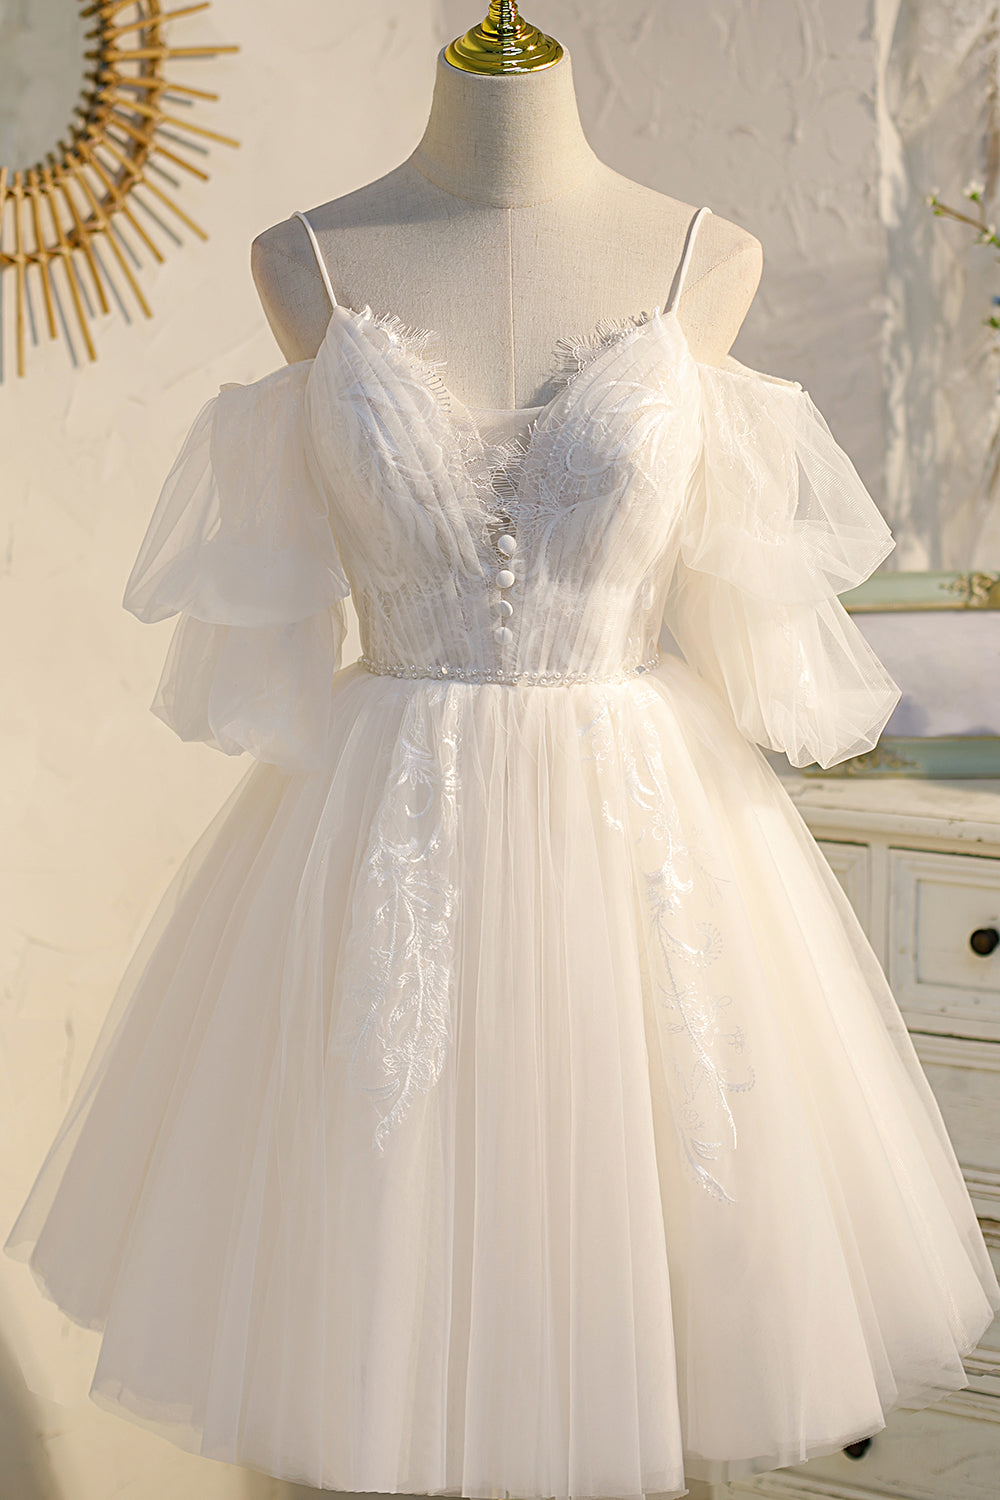 Bridesmaid Dress For Girls, Spaghetti Straps Ivory V Neck Lace Tulle Princess Homecoming Dresses